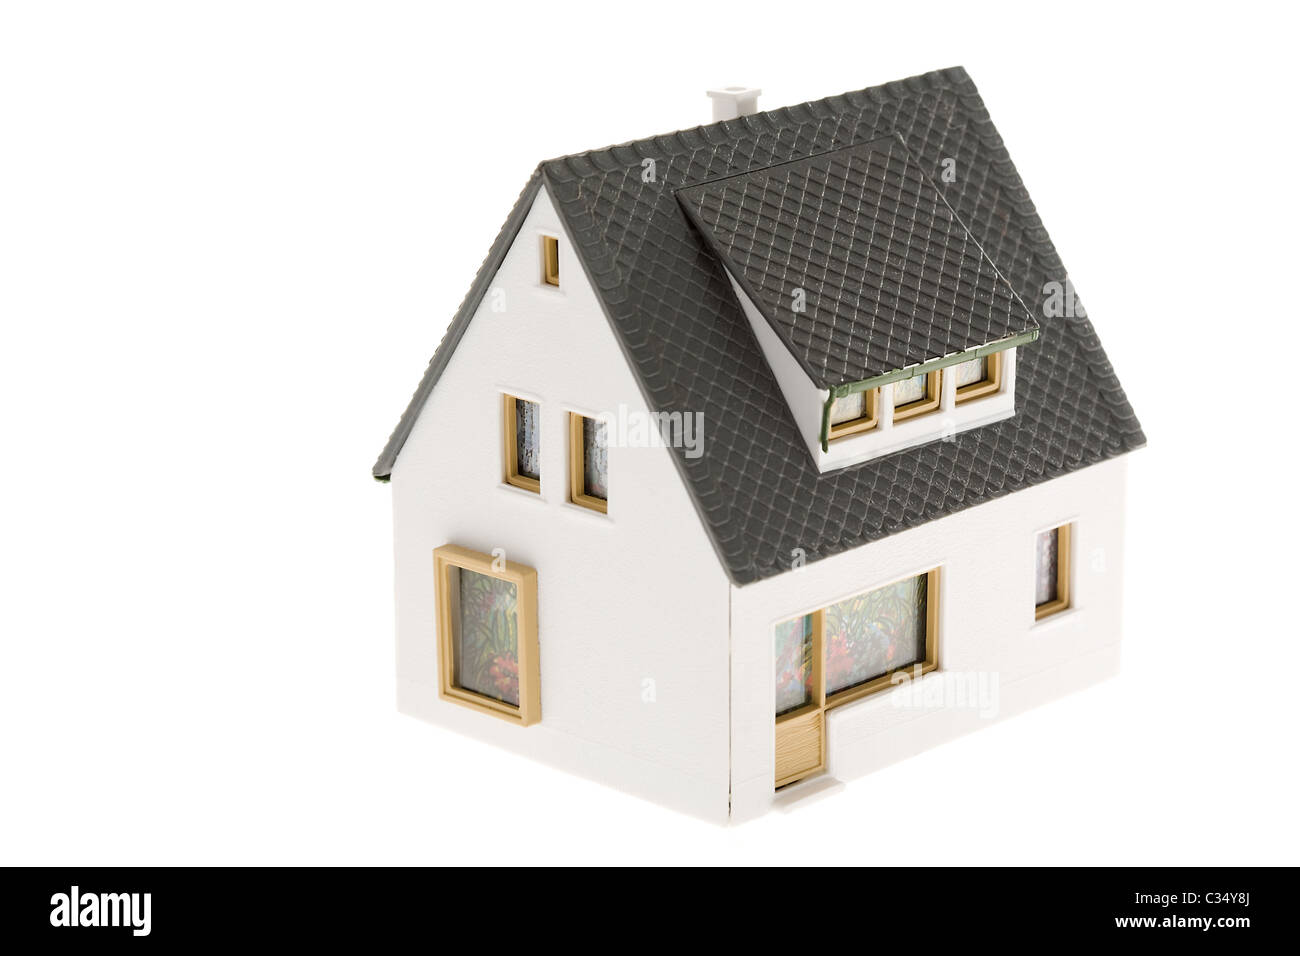 Close-up of toy house model on white background Banque D'Images